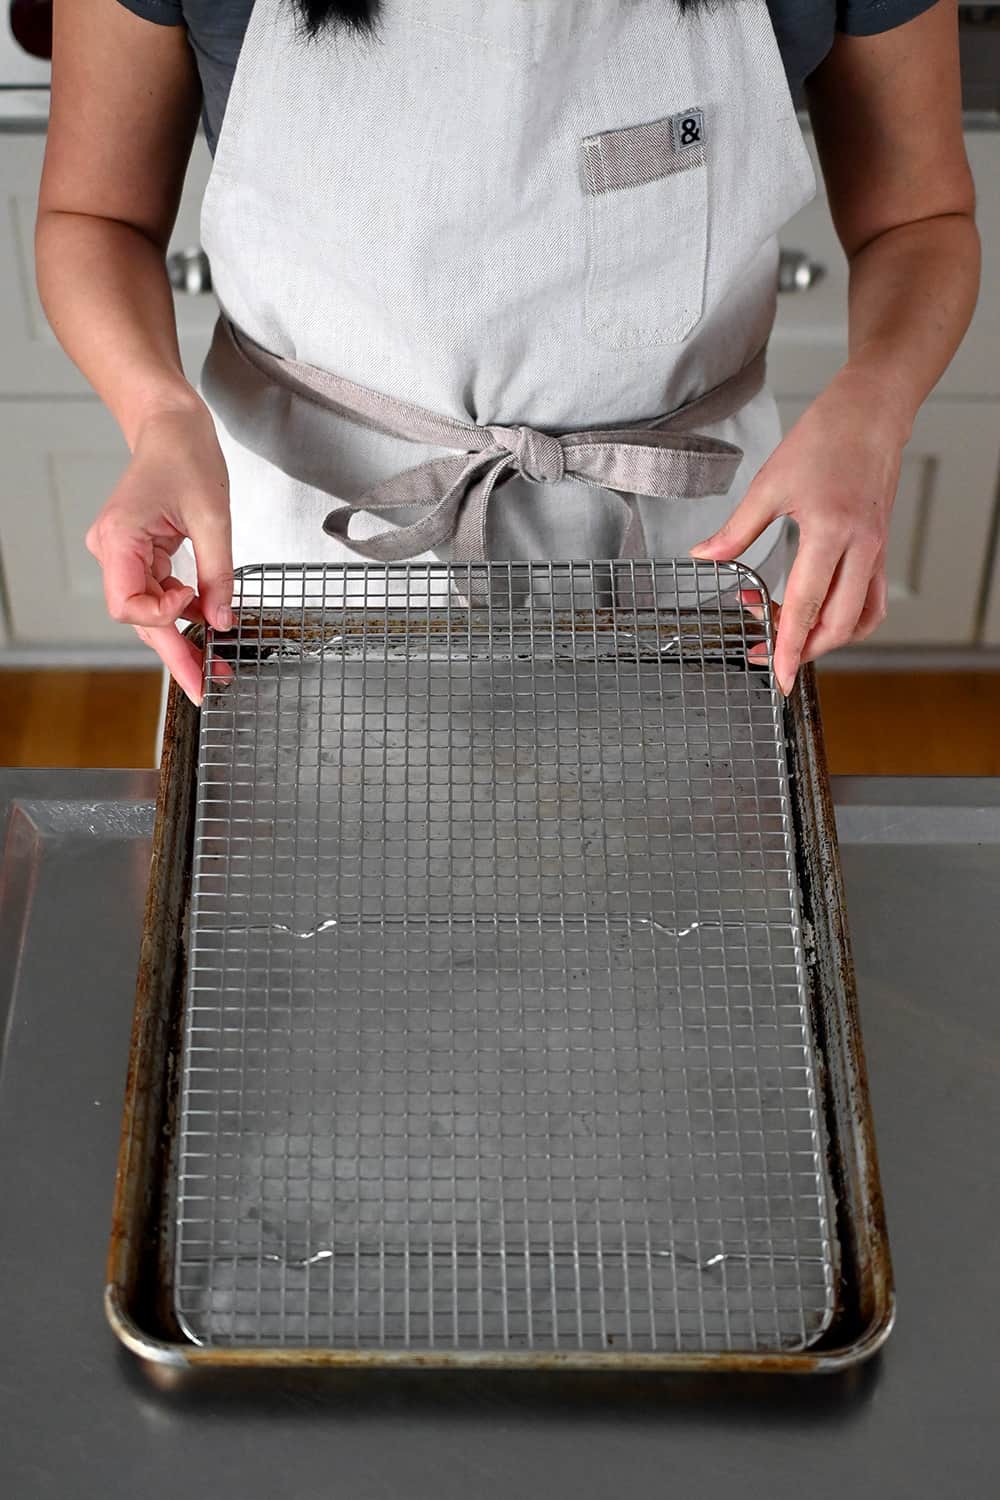 A person in an off-white apron is placing a wire rack inside a rimmed baking sheet